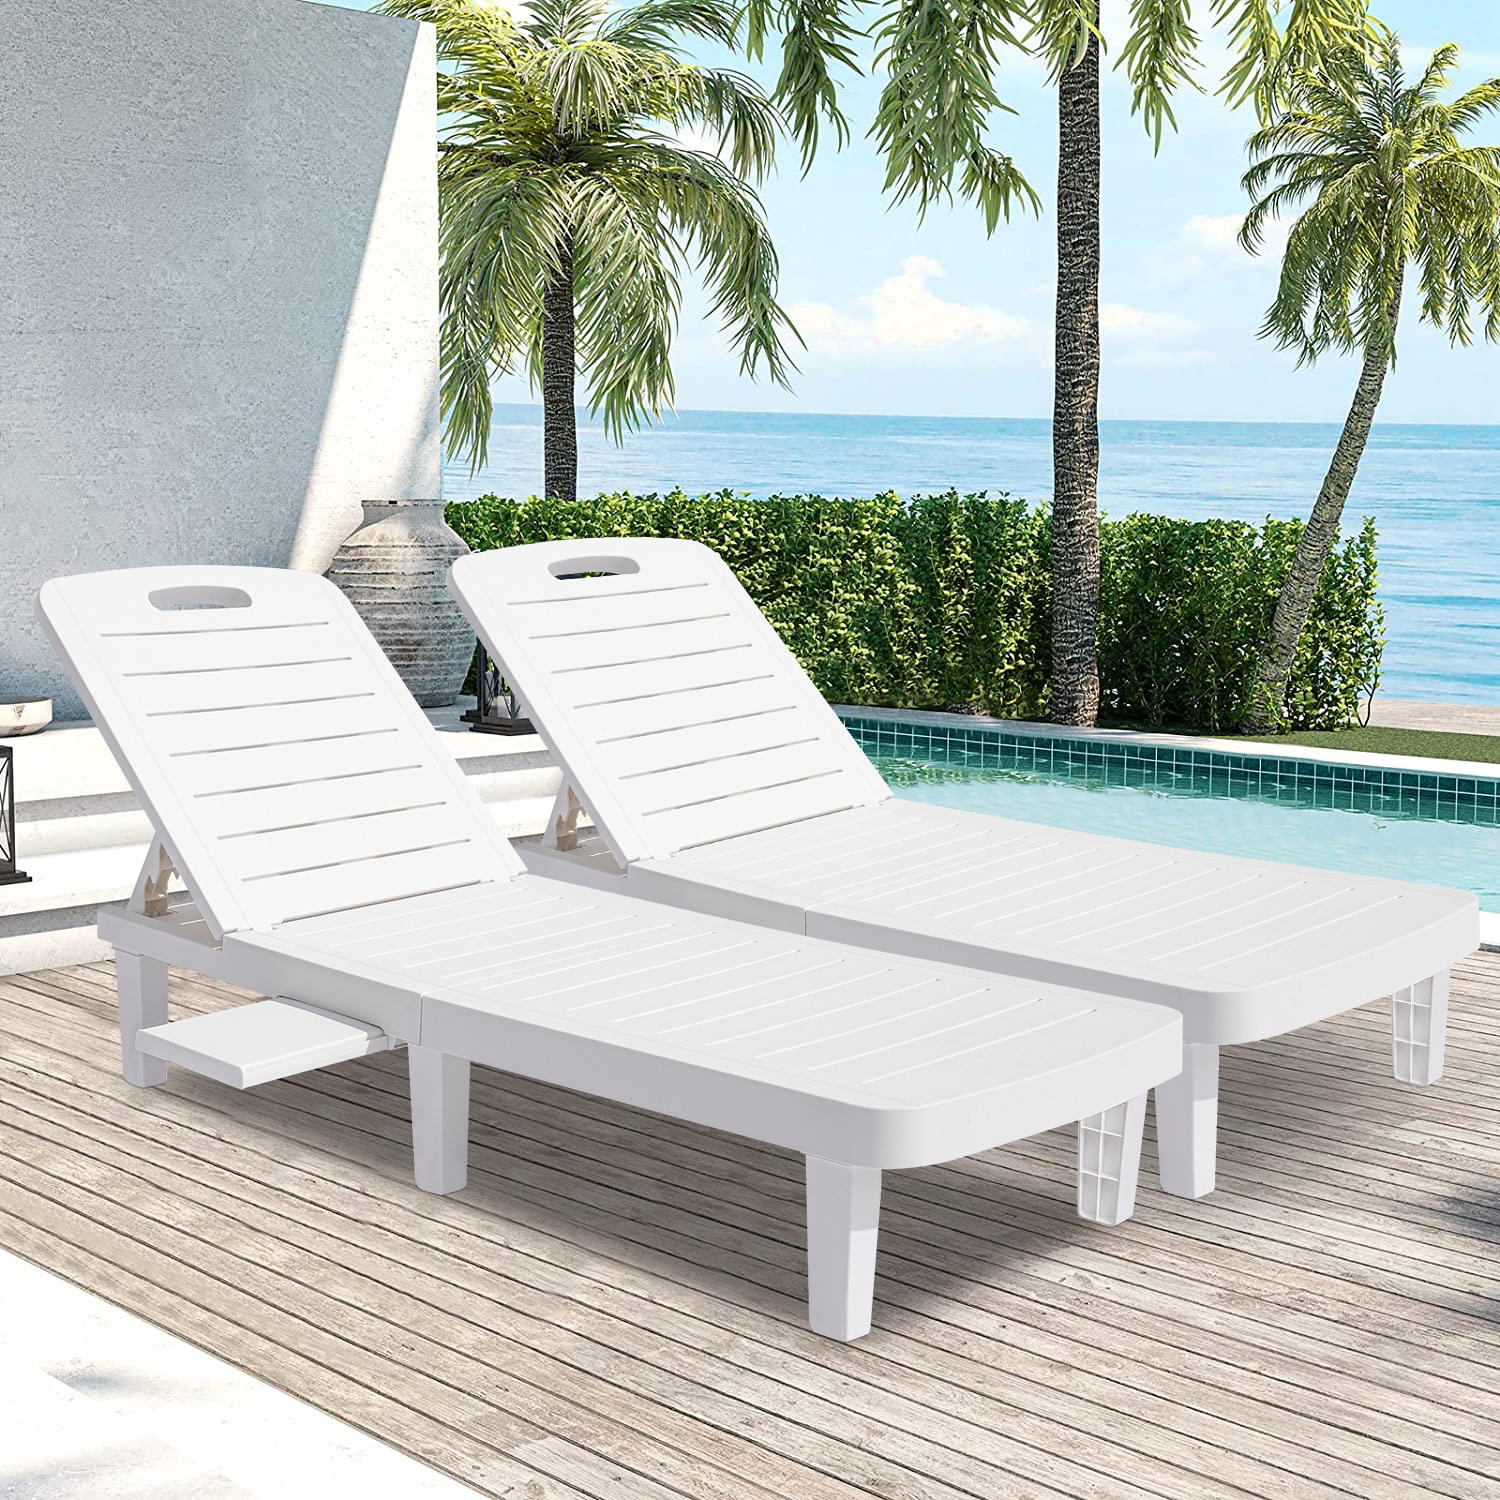 Pool Lounge Chairs Set of 2, Patio Chaise Lounge Chairs Outdoor Furniture Set for 2 with Adjustable Back and Retractable Tray, All-Weather Plastic Reclining Lounge Chair LLL1713 - image 1 of 10